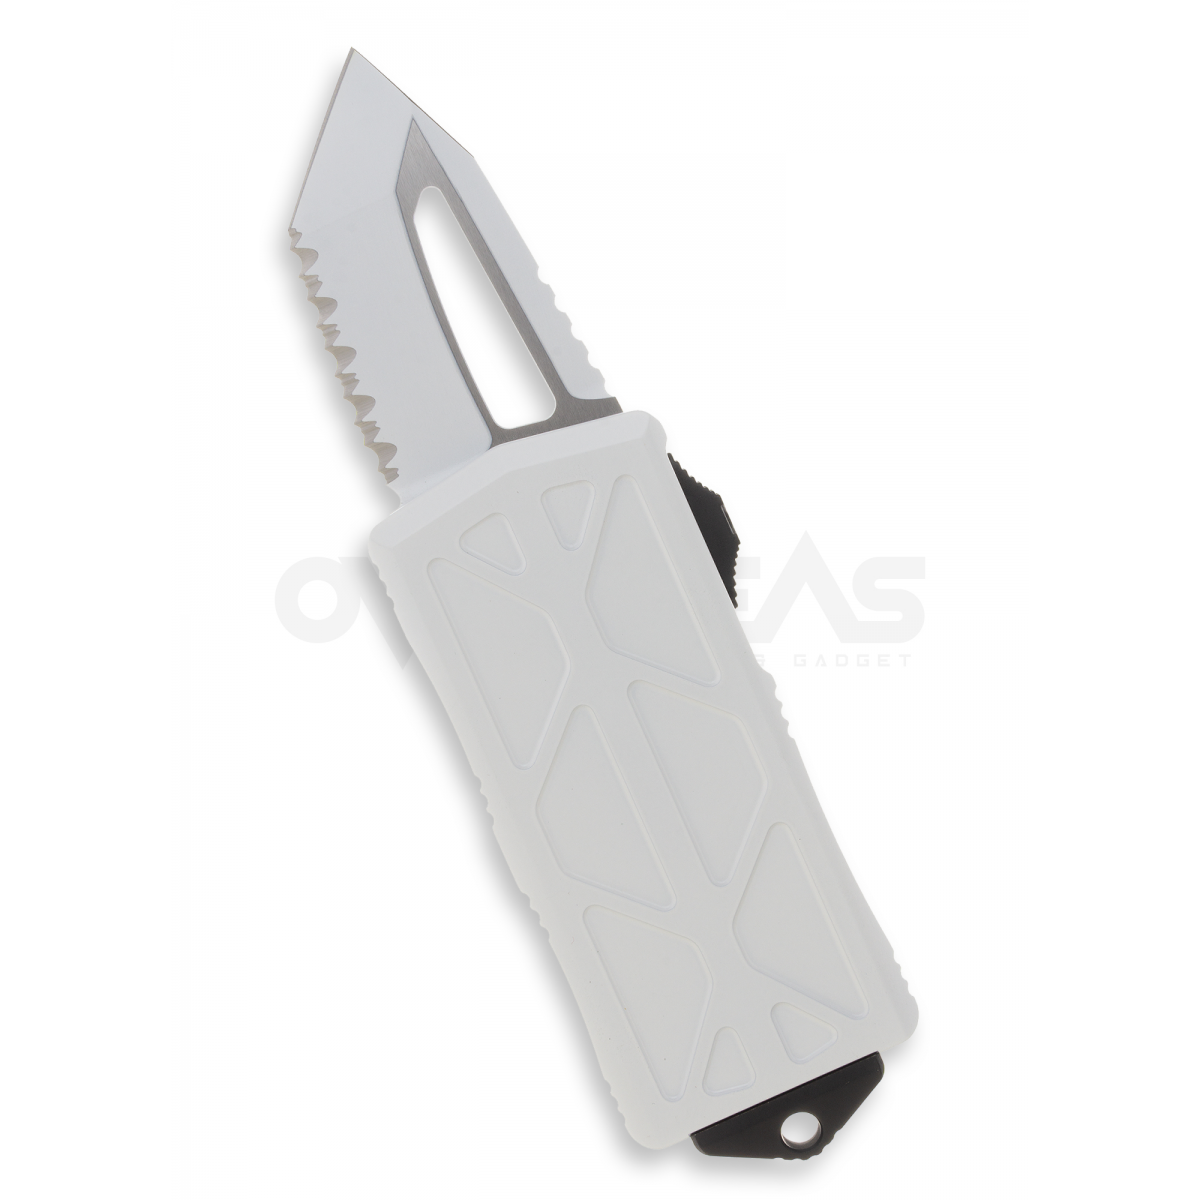 Microtech Exocet Tanto Stormtrooper CA Legal OTF Auto Knife (M390 1.9" White Serr),158-3ST